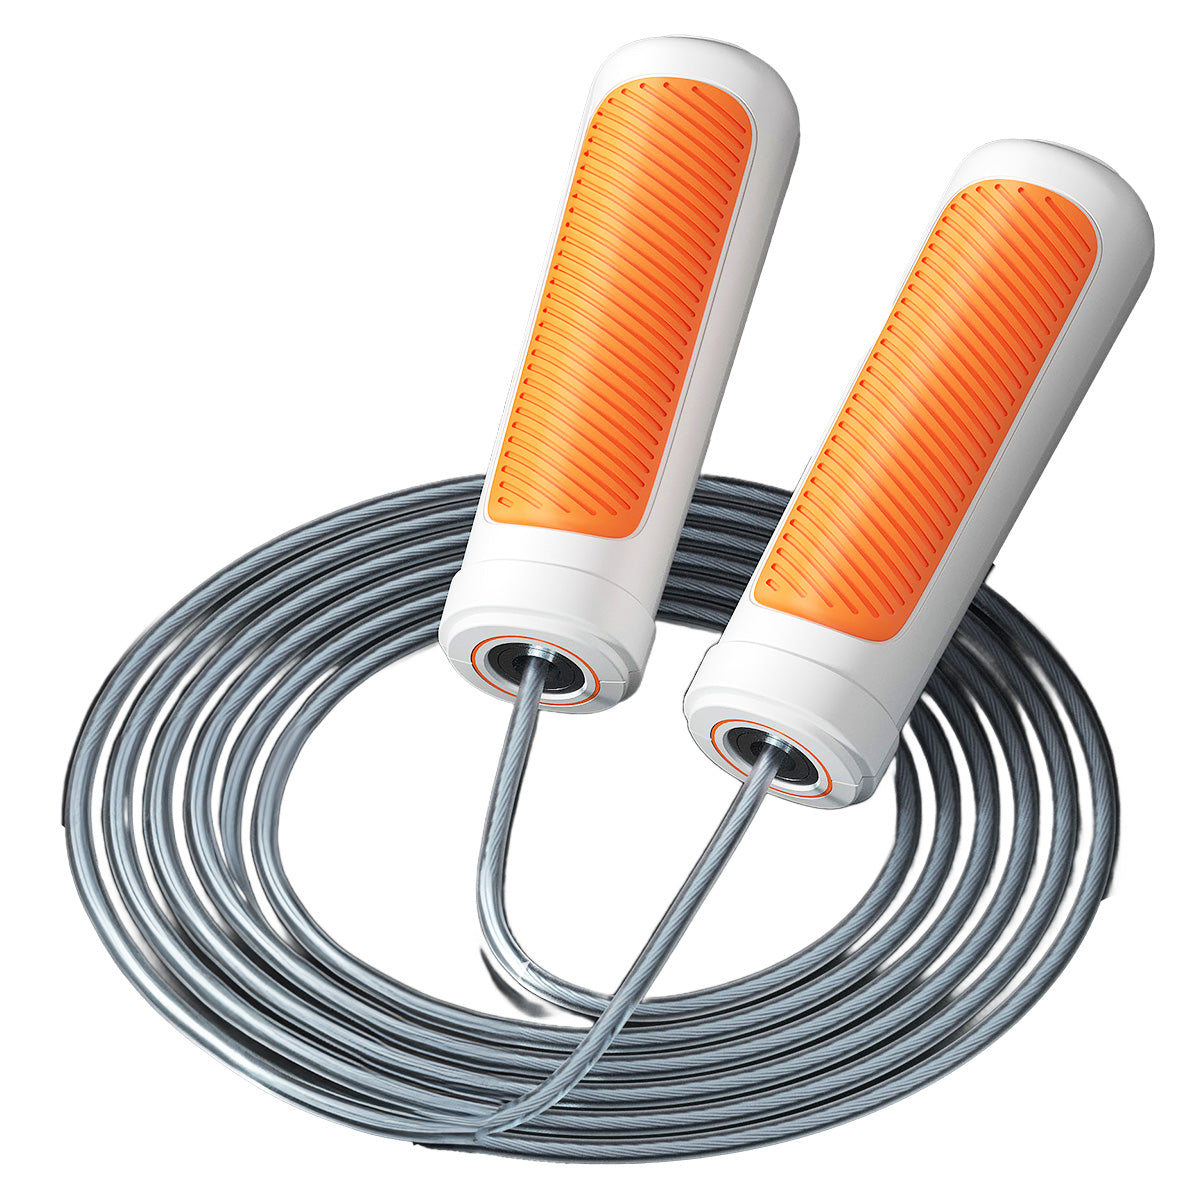 Charged Bluetooth Jump Rope